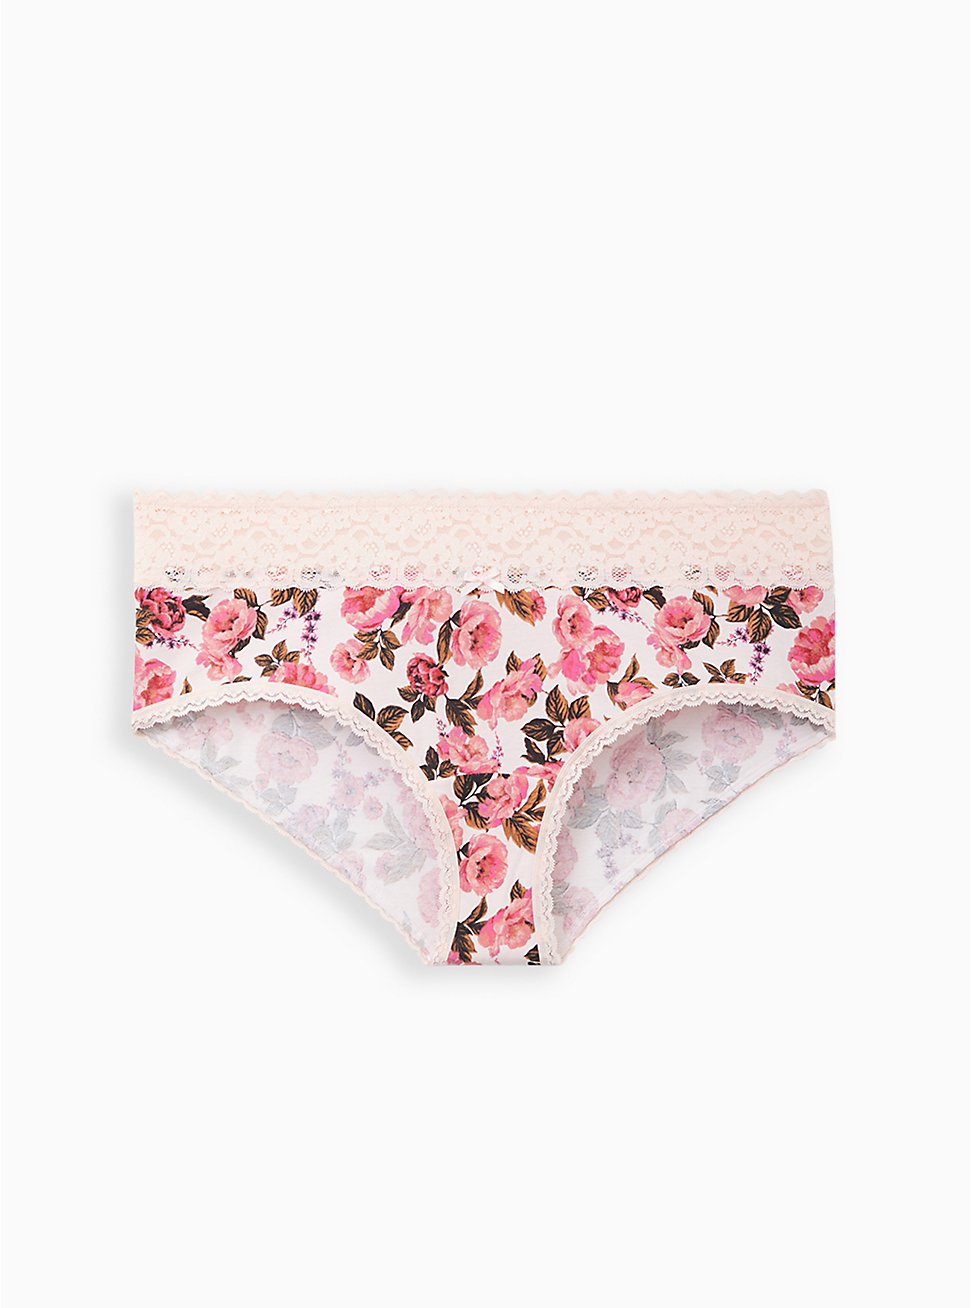 Wide Lace Cheeky Panty - Cotton Floral Pink, , hi-res